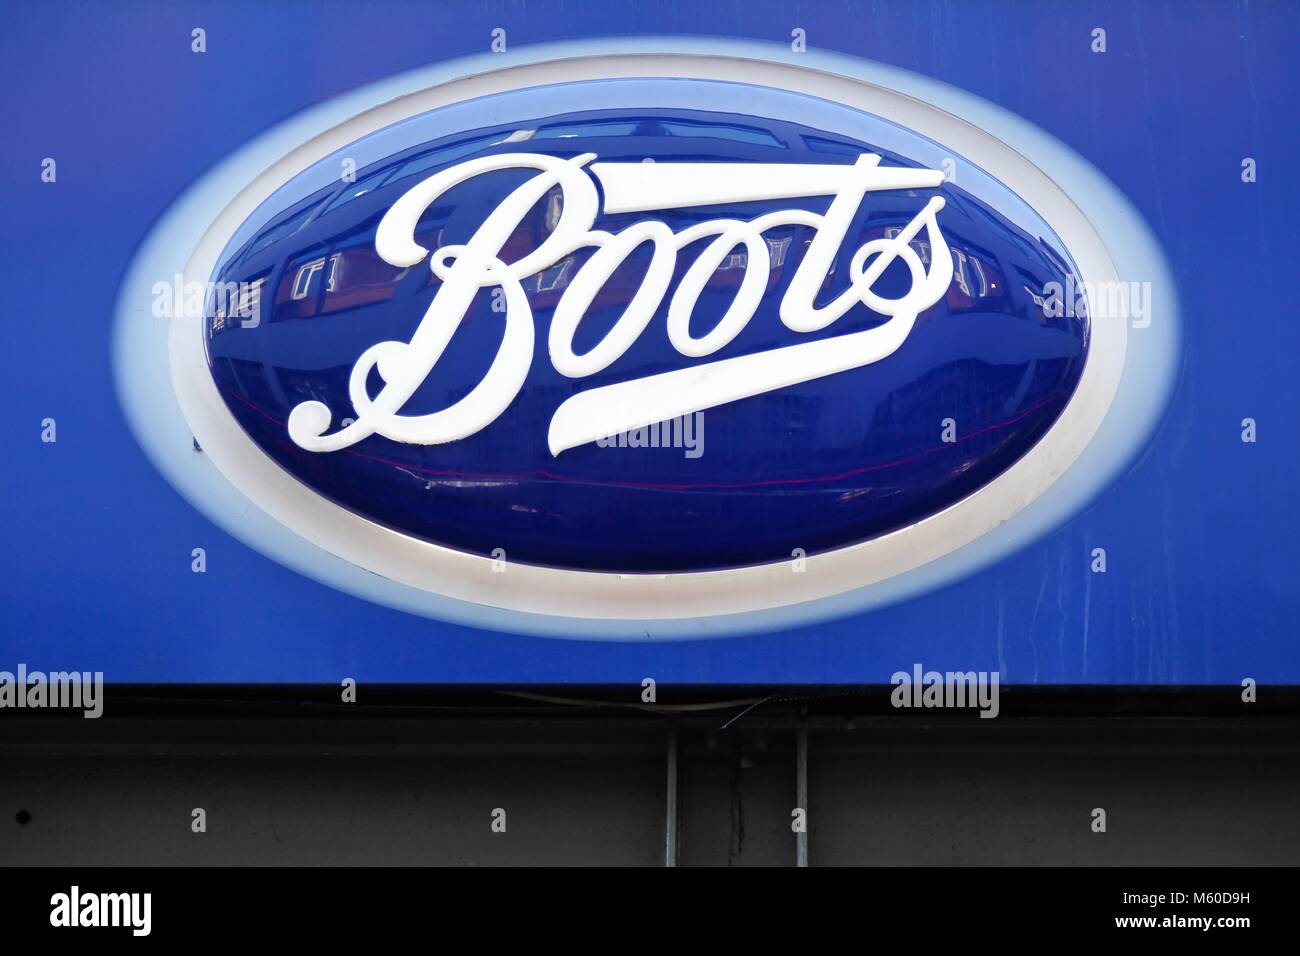 London, United Kingdom - January 31, 2018: Boots logo on a wall. Boots is a pharmacy chain in the United Kingdom, Ireland, Norway, Thailand Stock Photo